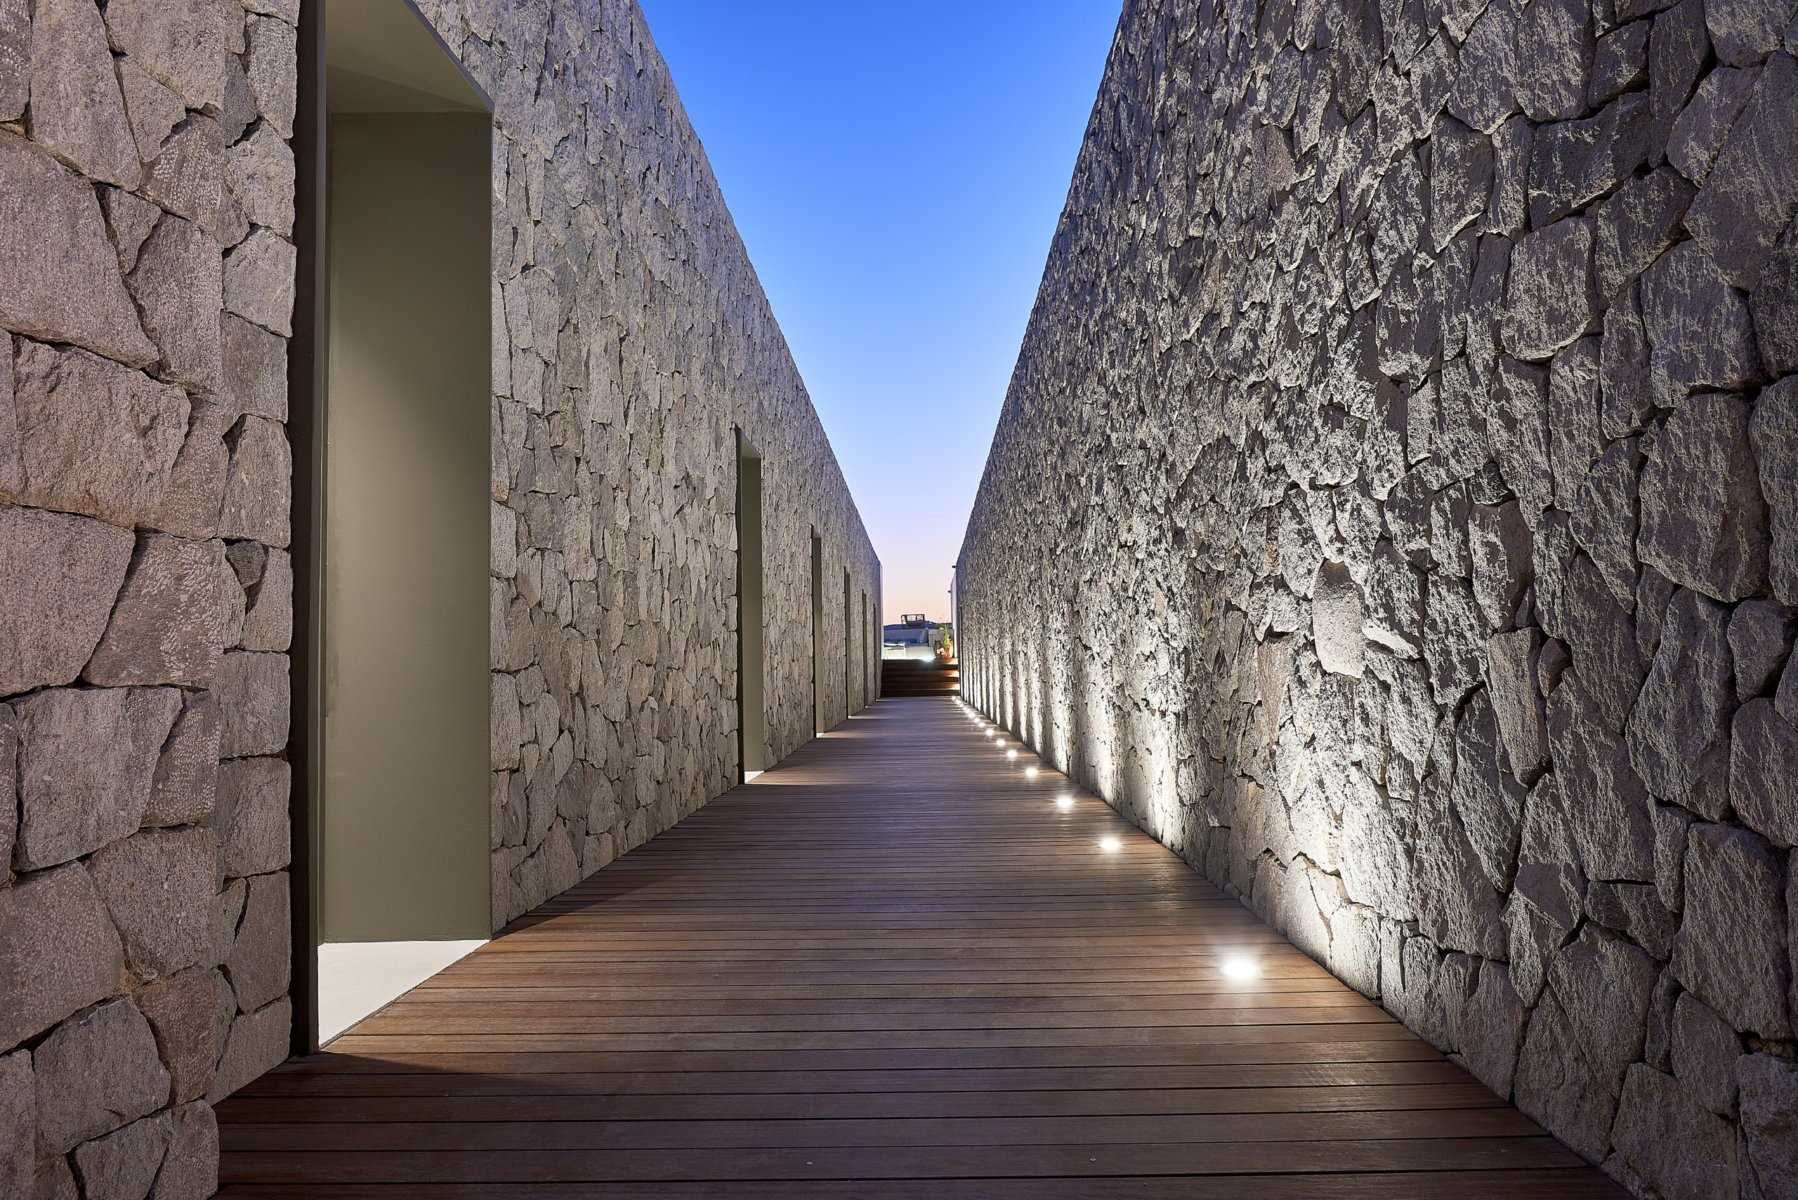 Cool gray stone walls are featured throughout this boutique hotel and were exclusively made using local raw materials